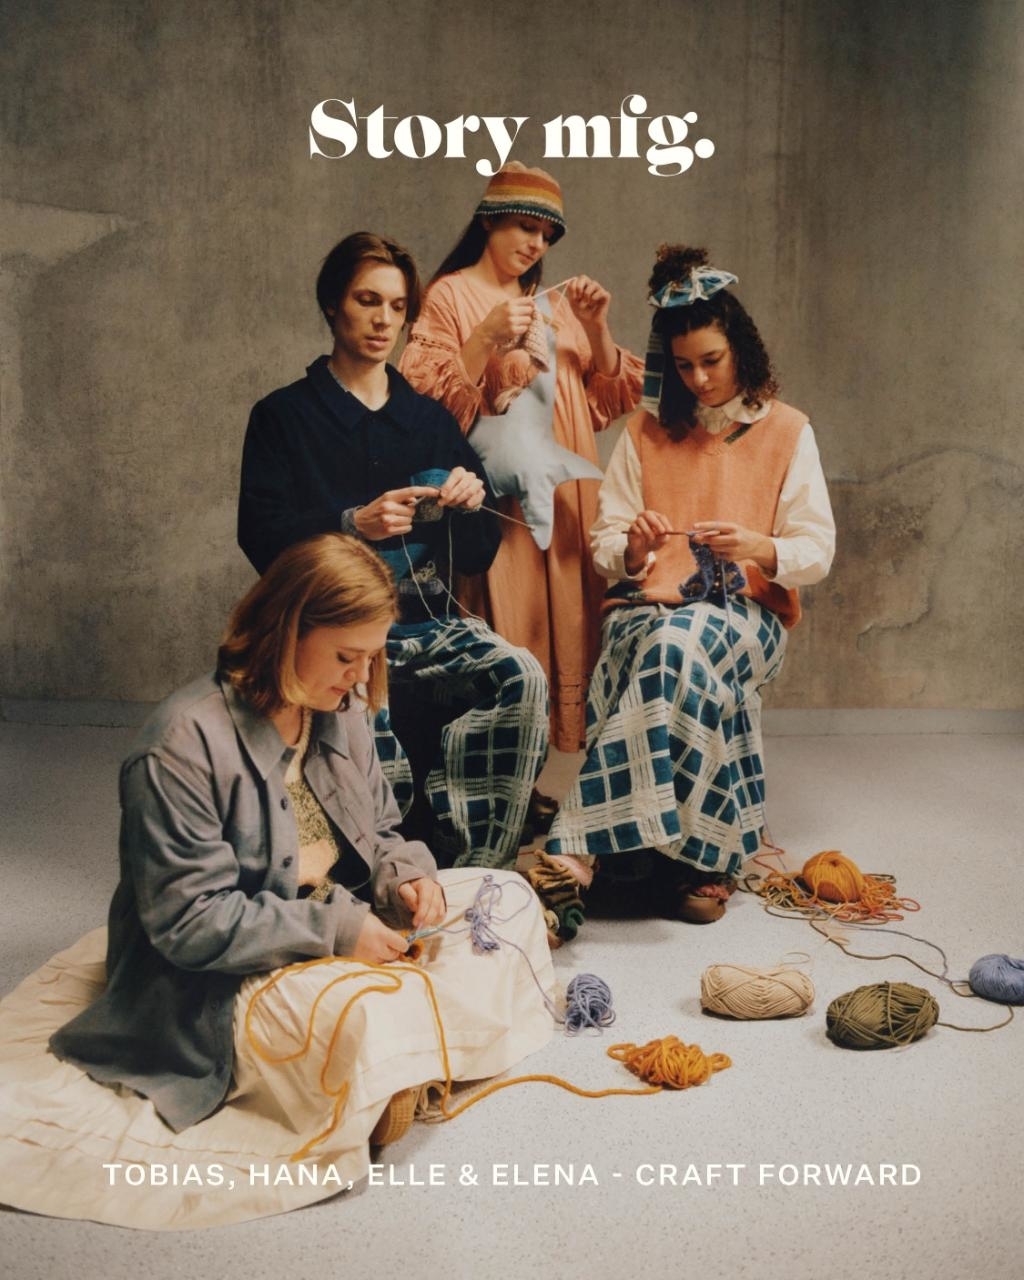 Four people knitting and posing, with text &quot;Story mig. TOBIAS, HANA, ELLE &amp; ELENA - CRAFT FORWARD&quot; above them